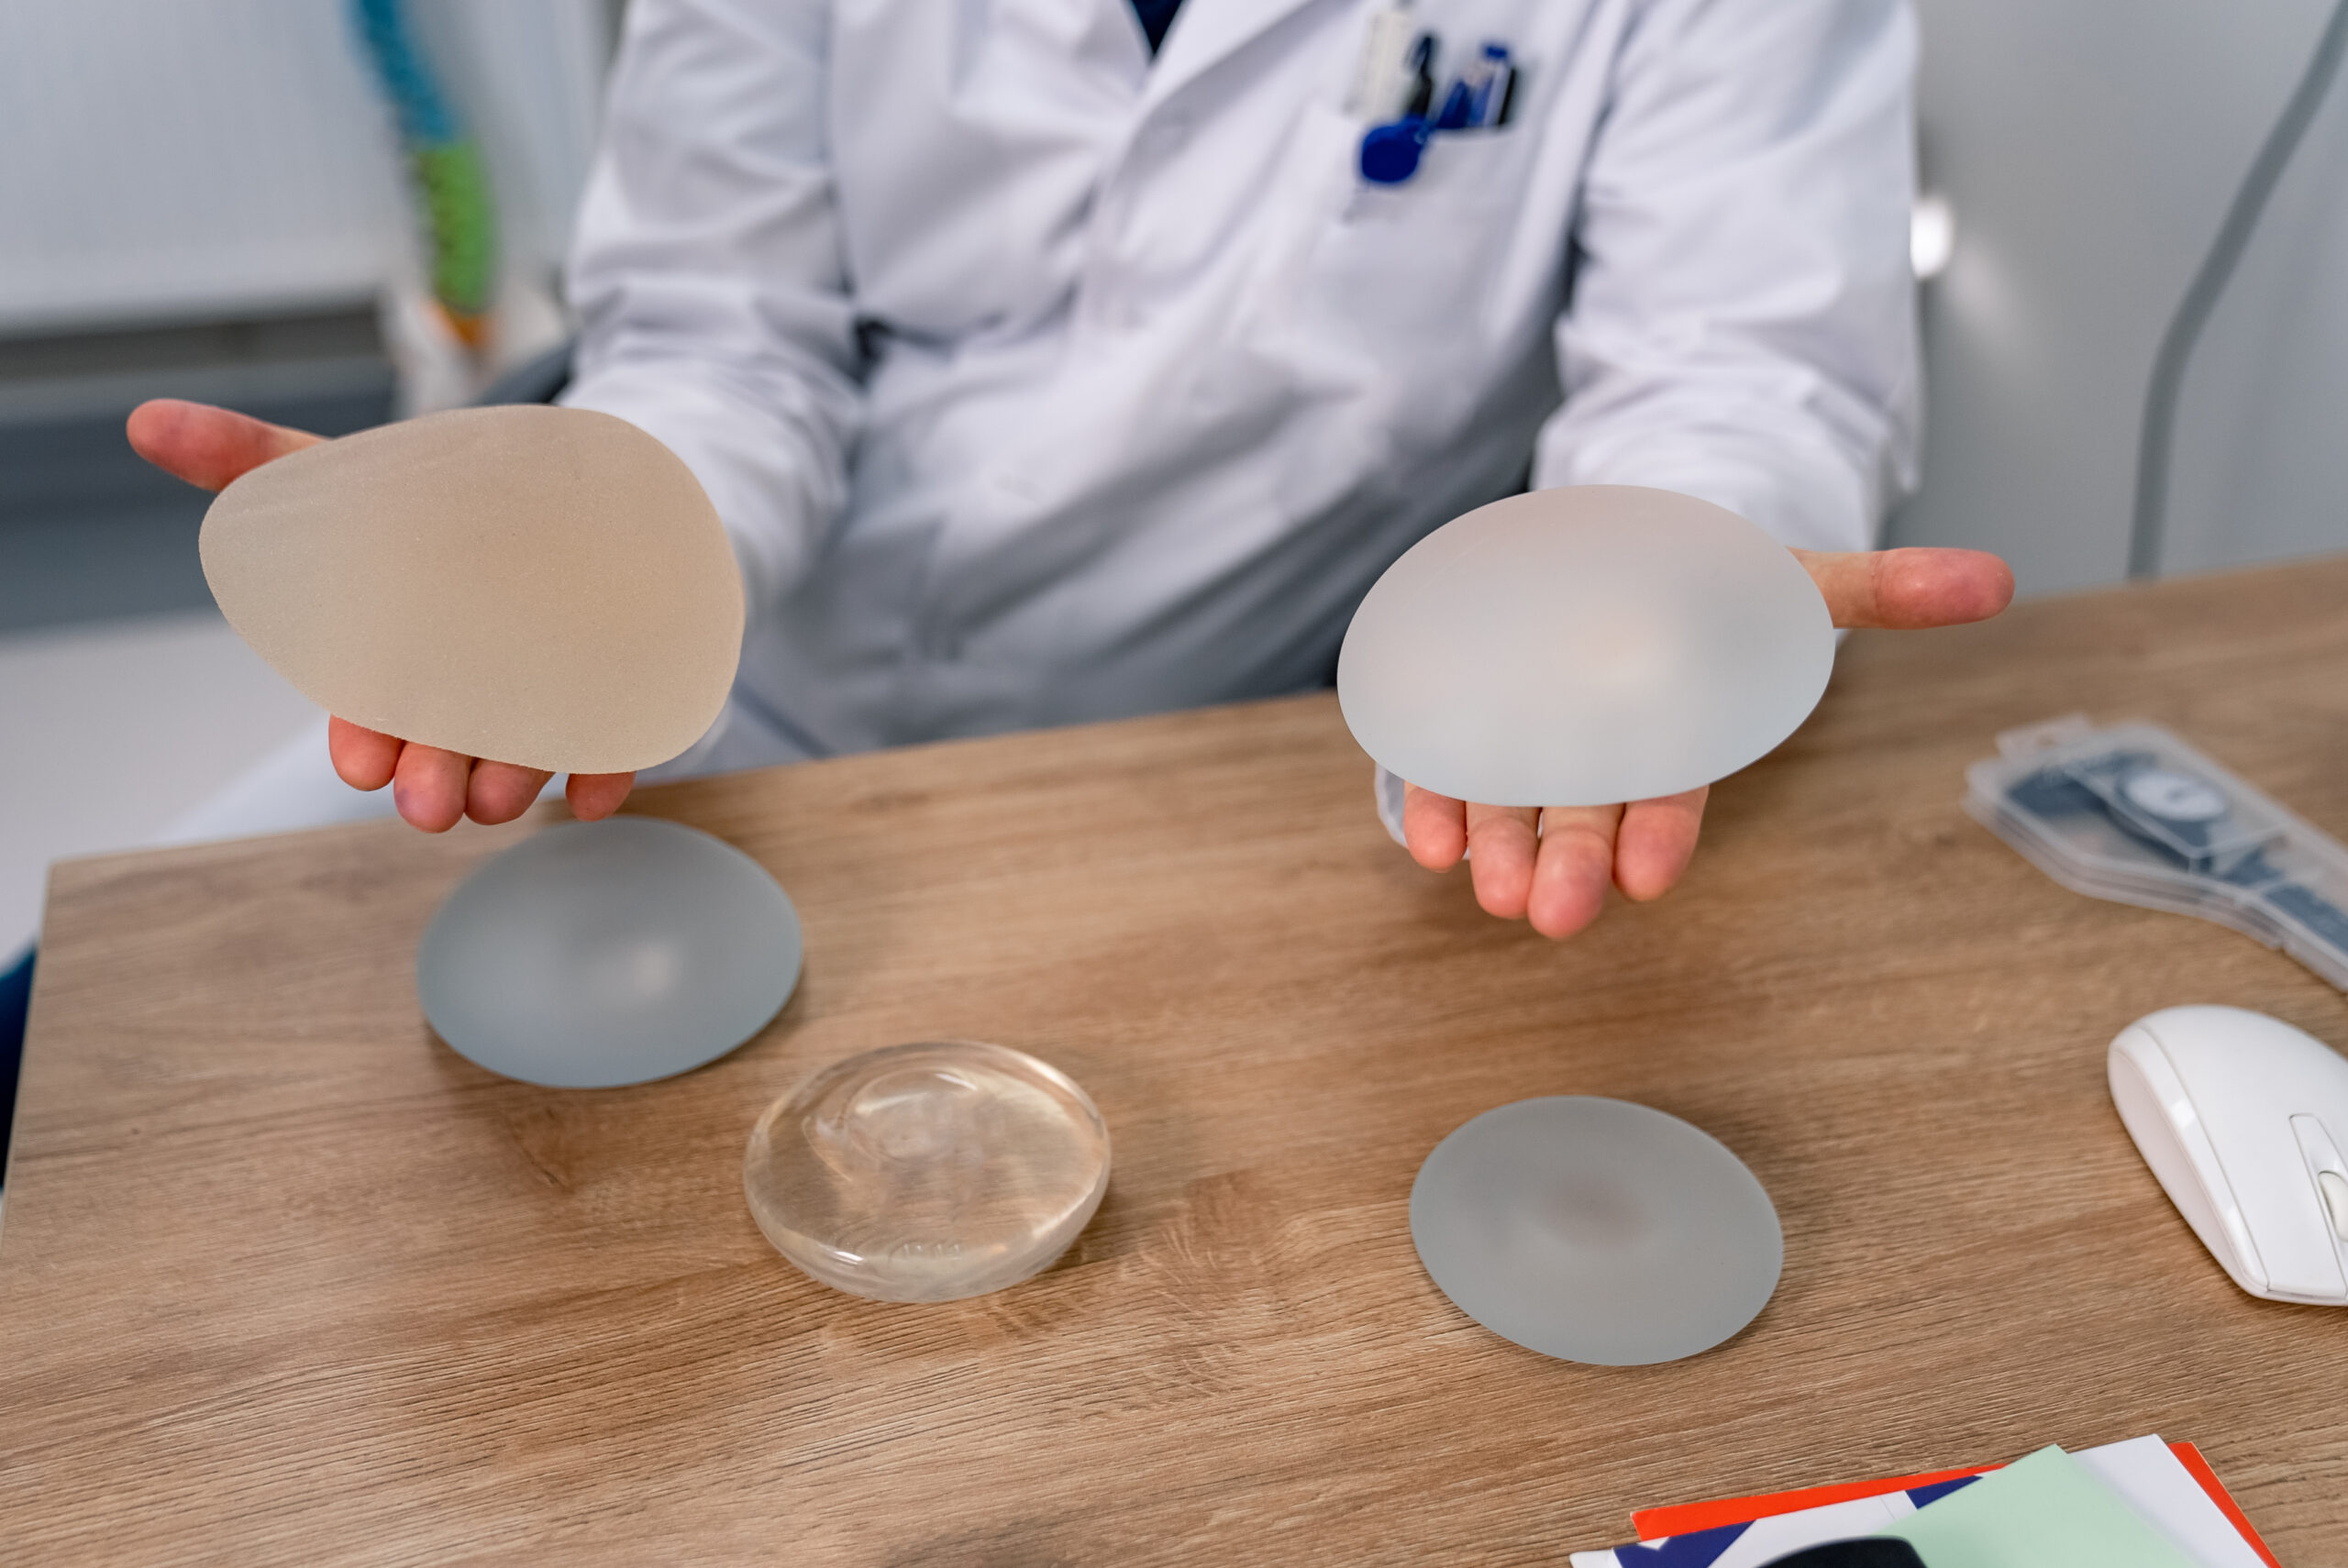 Doctor holding implants in his hands. Medical silicon implants in doctor hands.